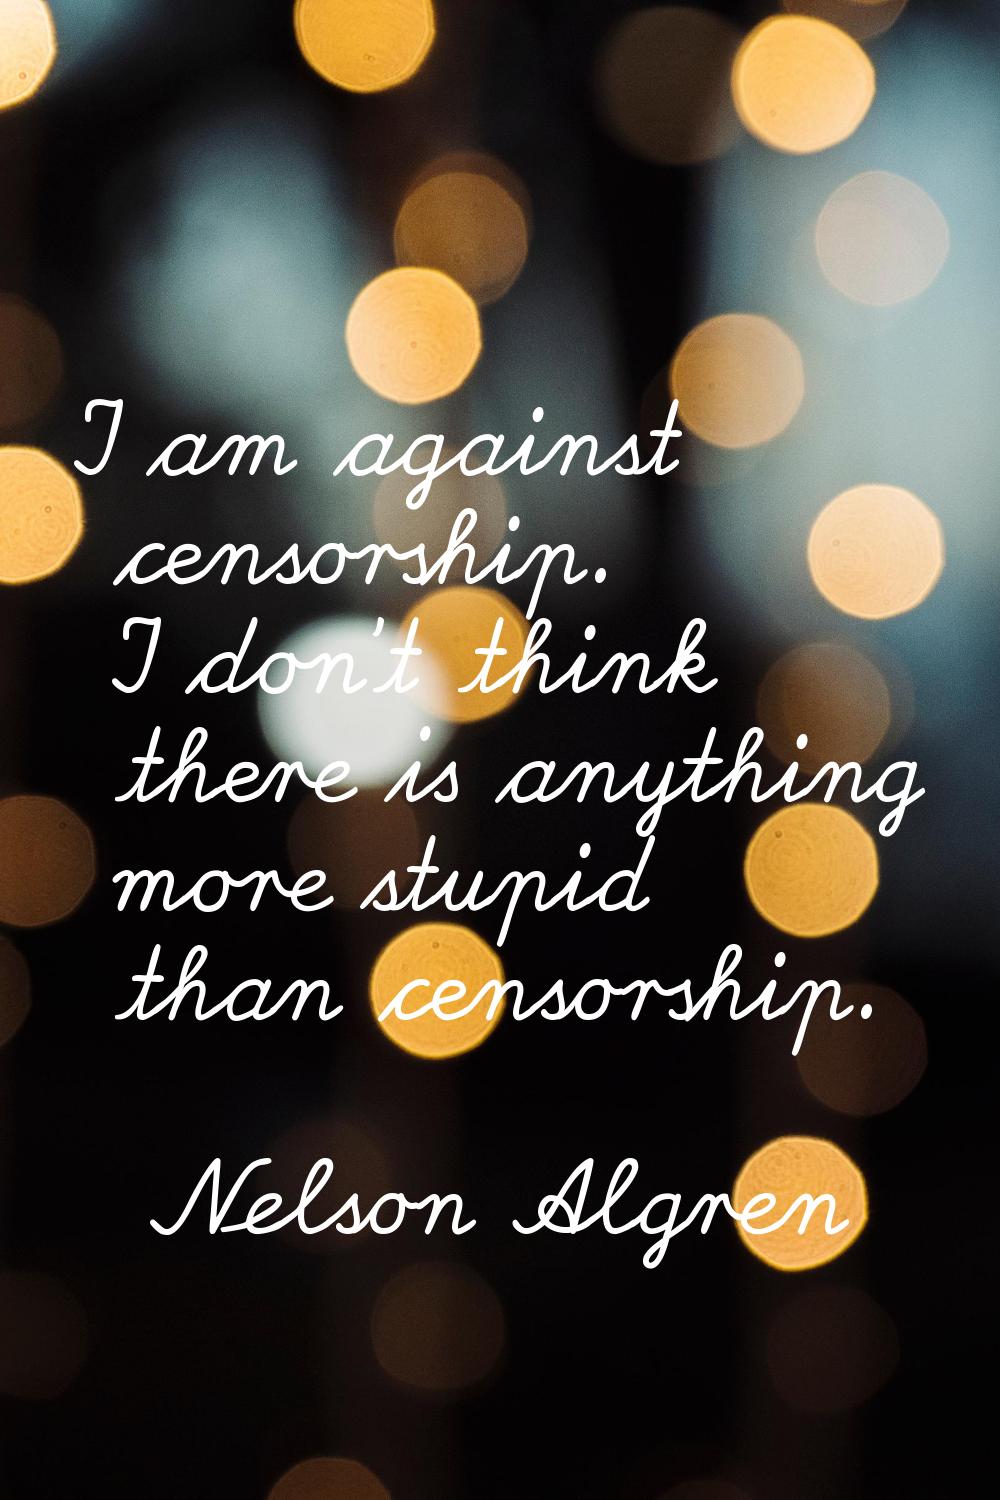 I am against censorship. I don't think there is anything more stupid than censorship.